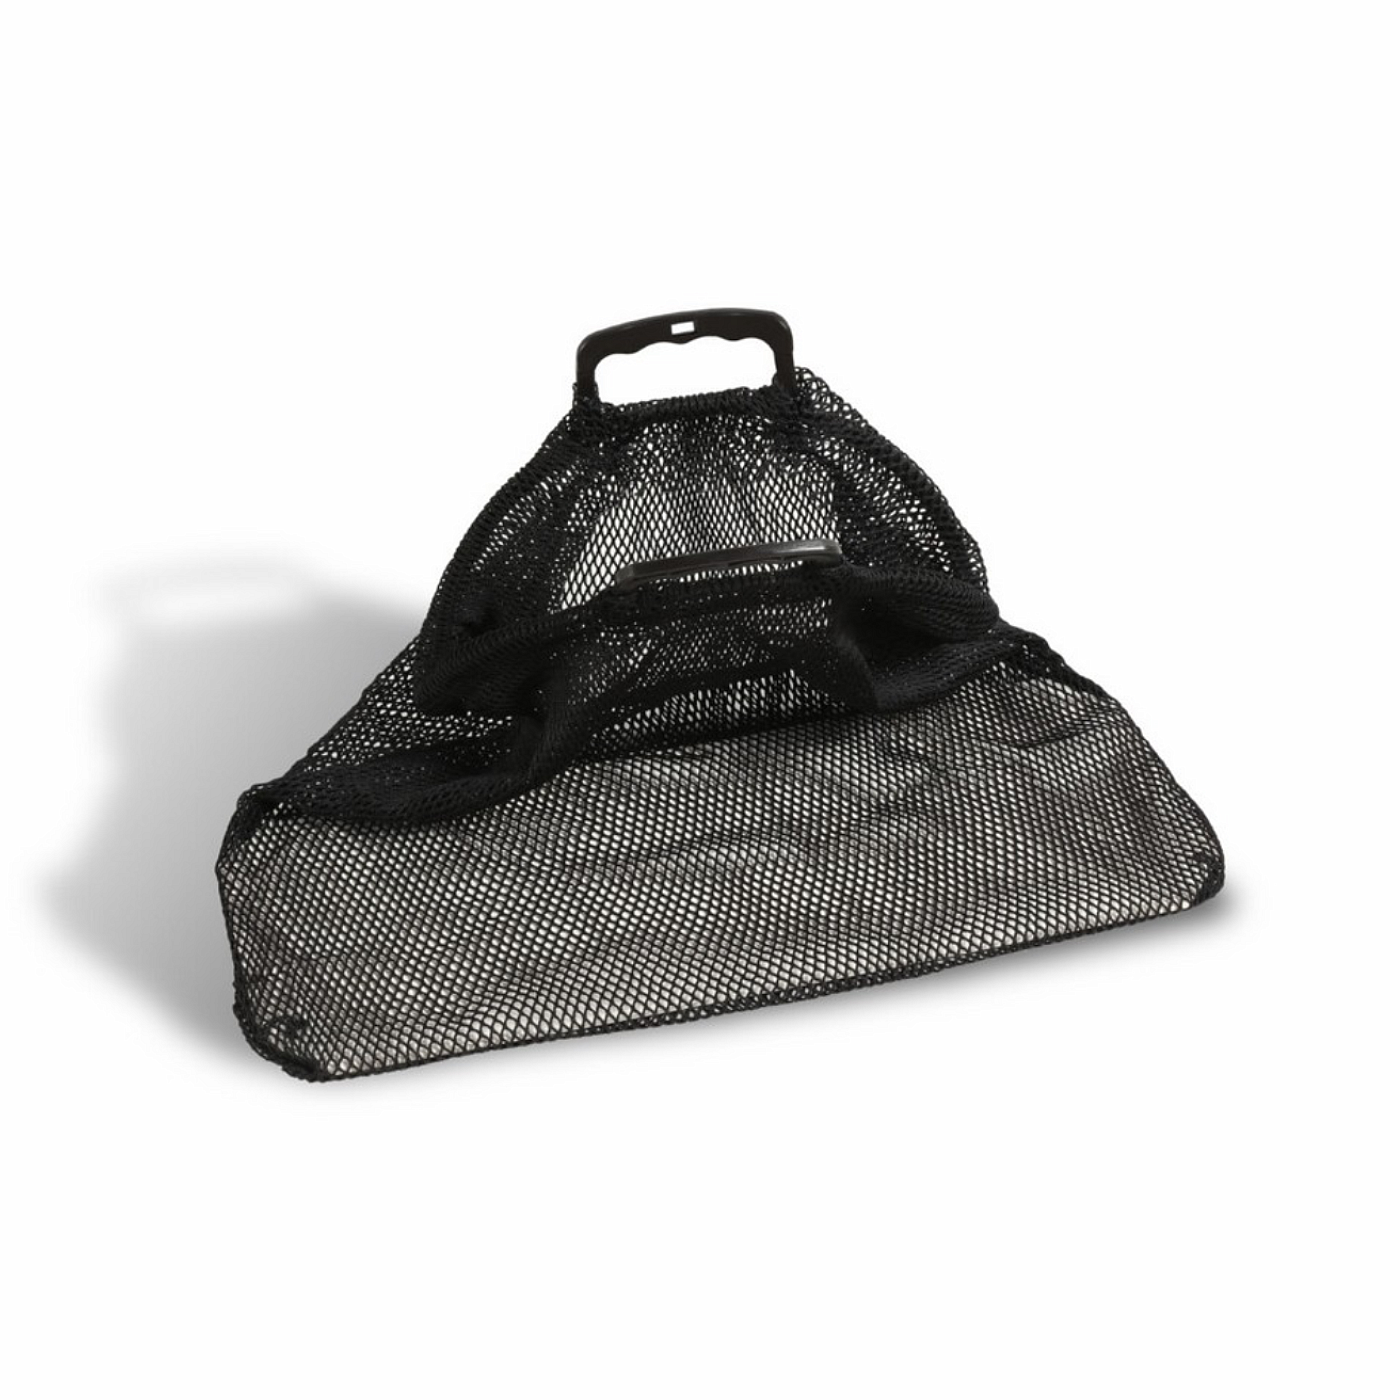 https://www.agama-diving.com/cache/images/full/10878--sitka-na-ryby-omer-fish-holder-net-de-luxe.png